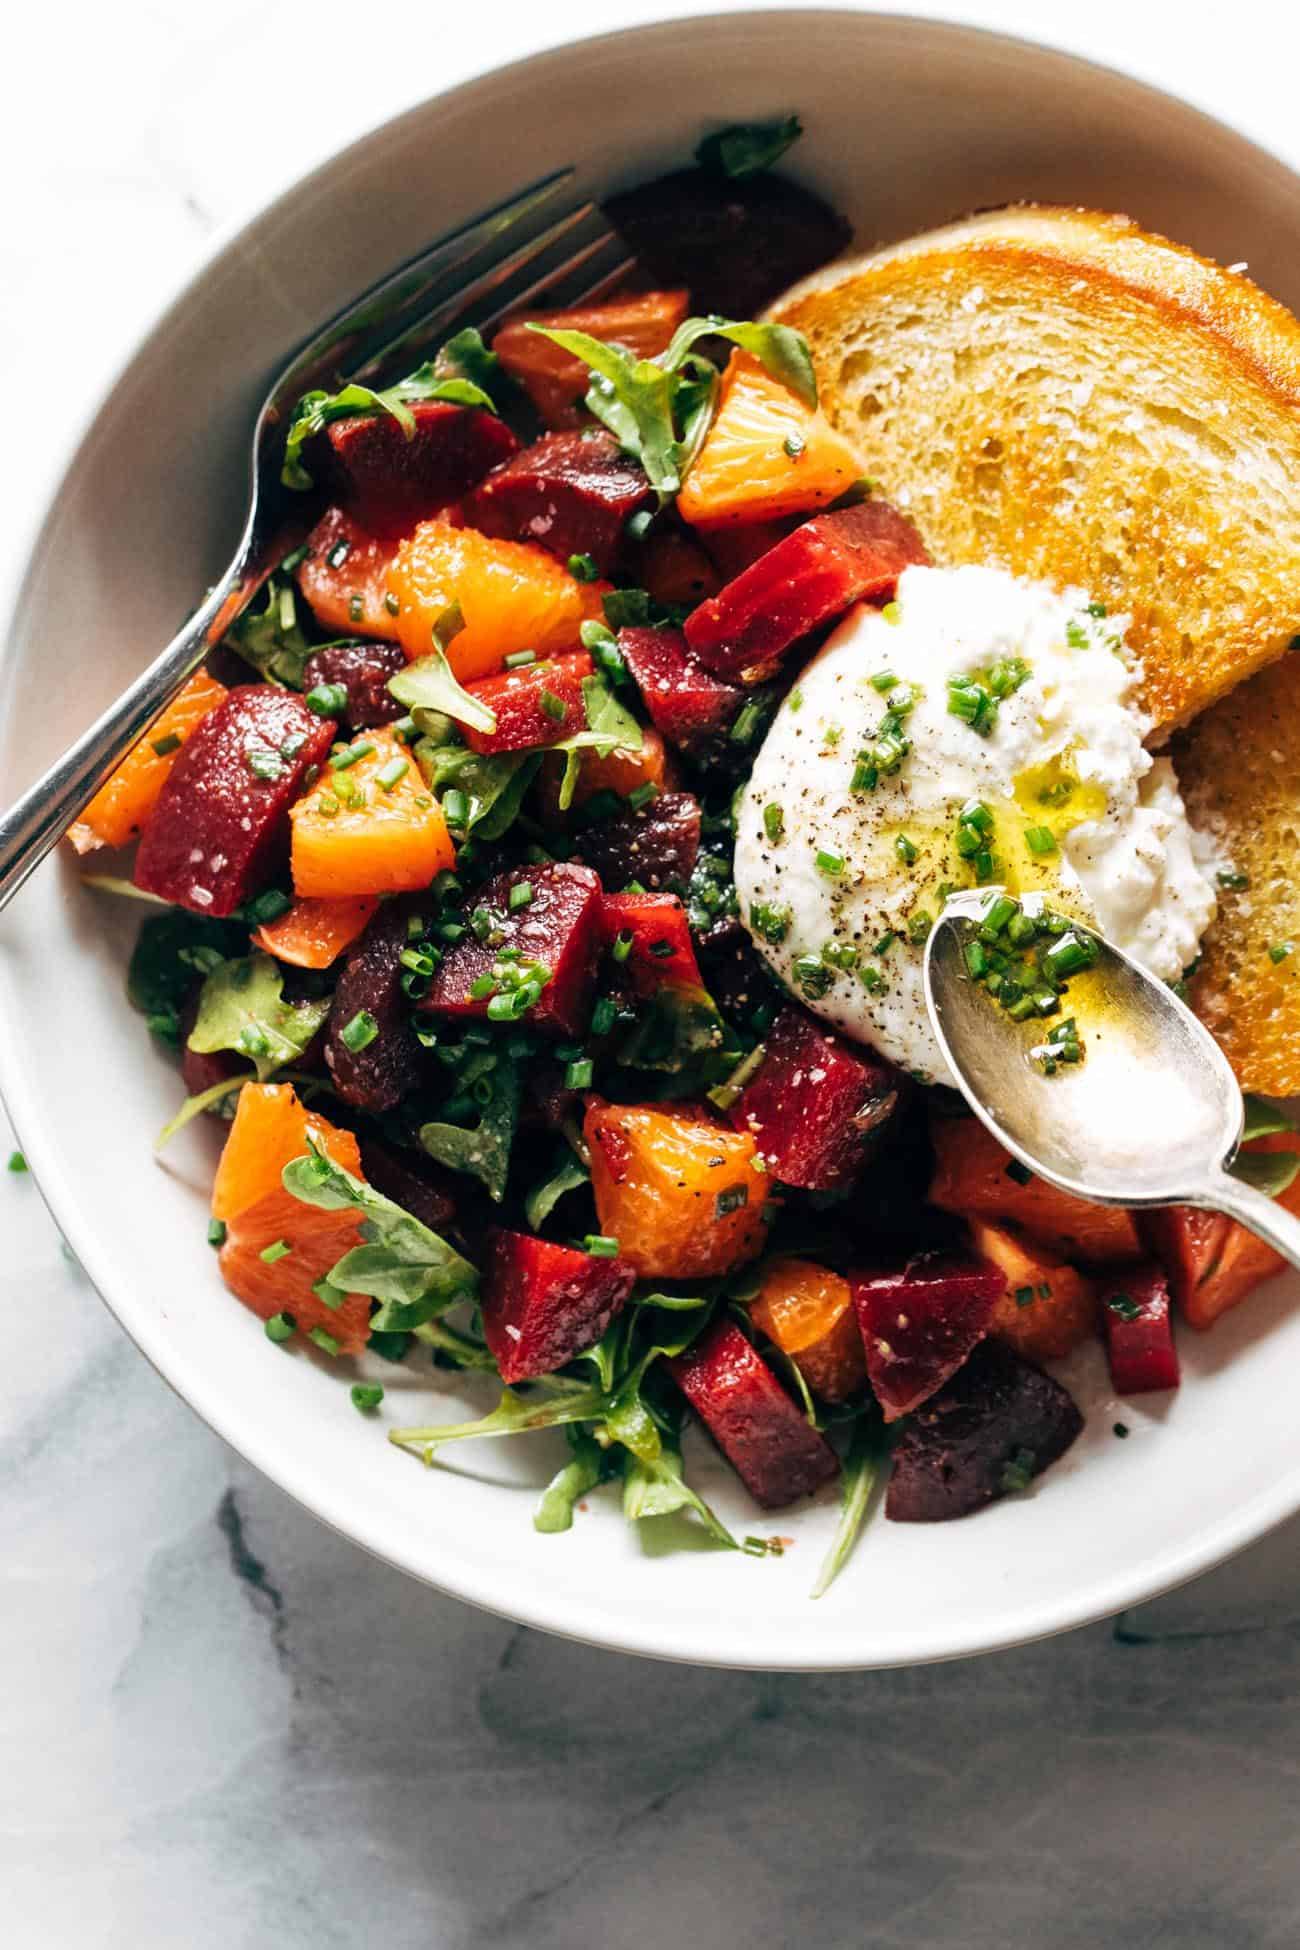 Toast with an beets and burrata.